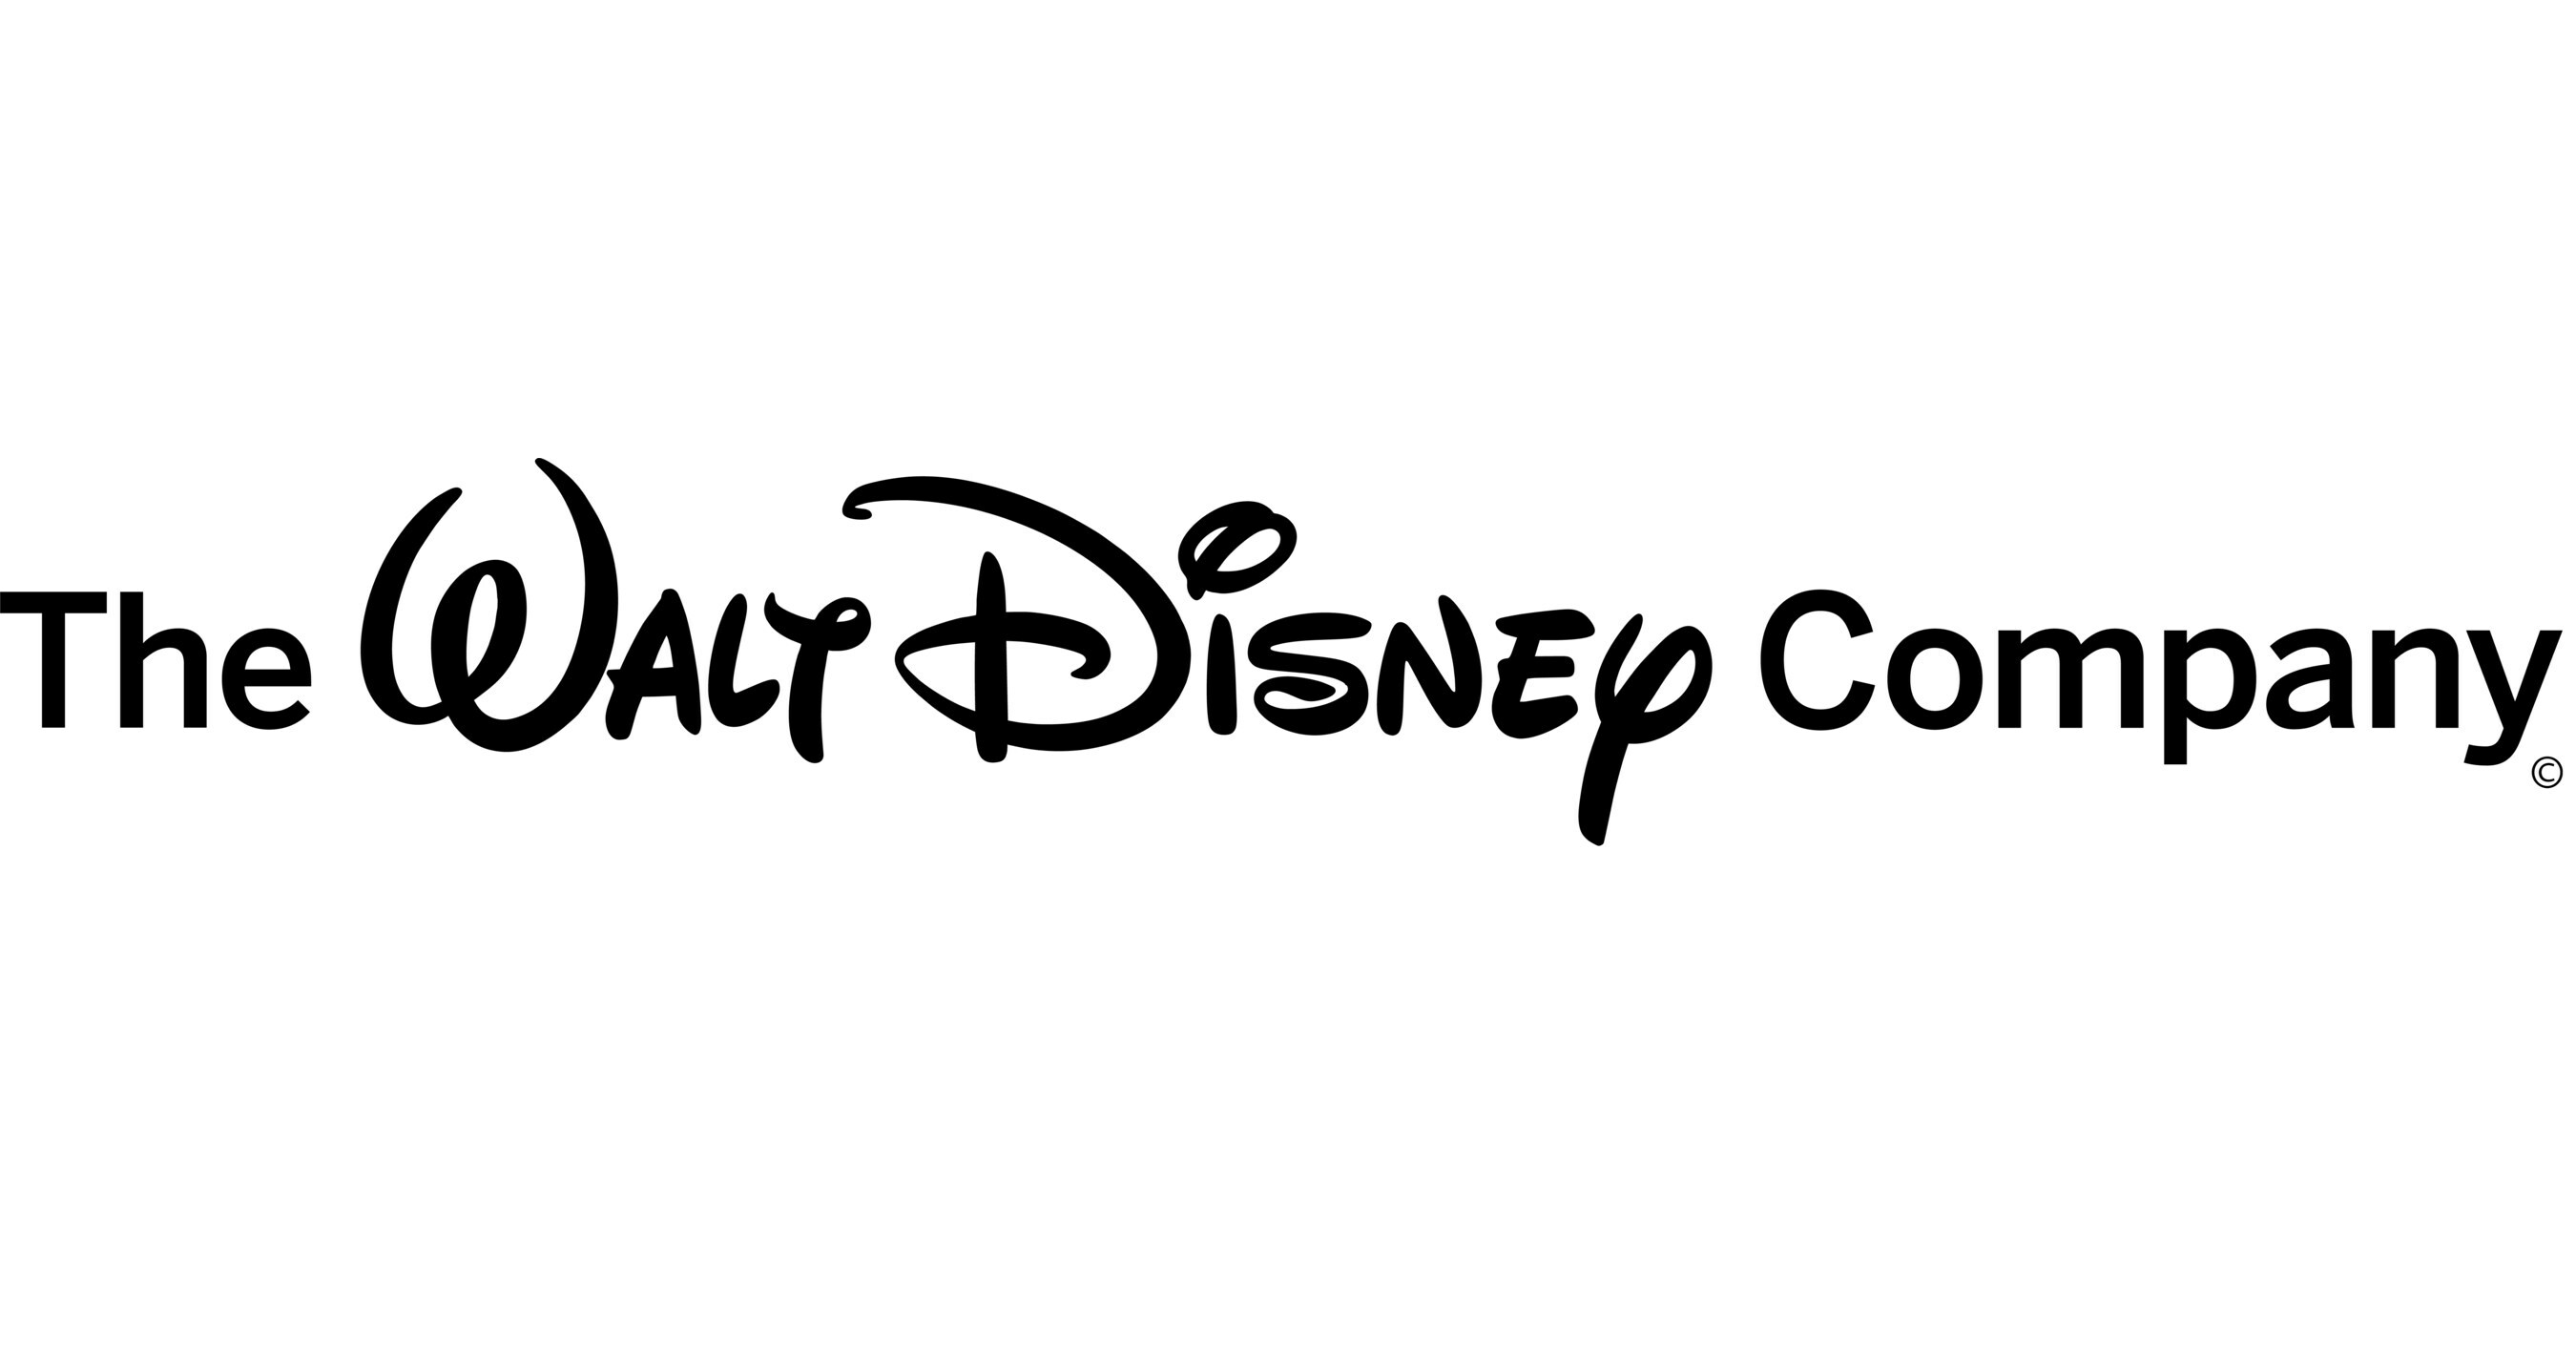 Disney+ Basic offered free to Charter subscribers